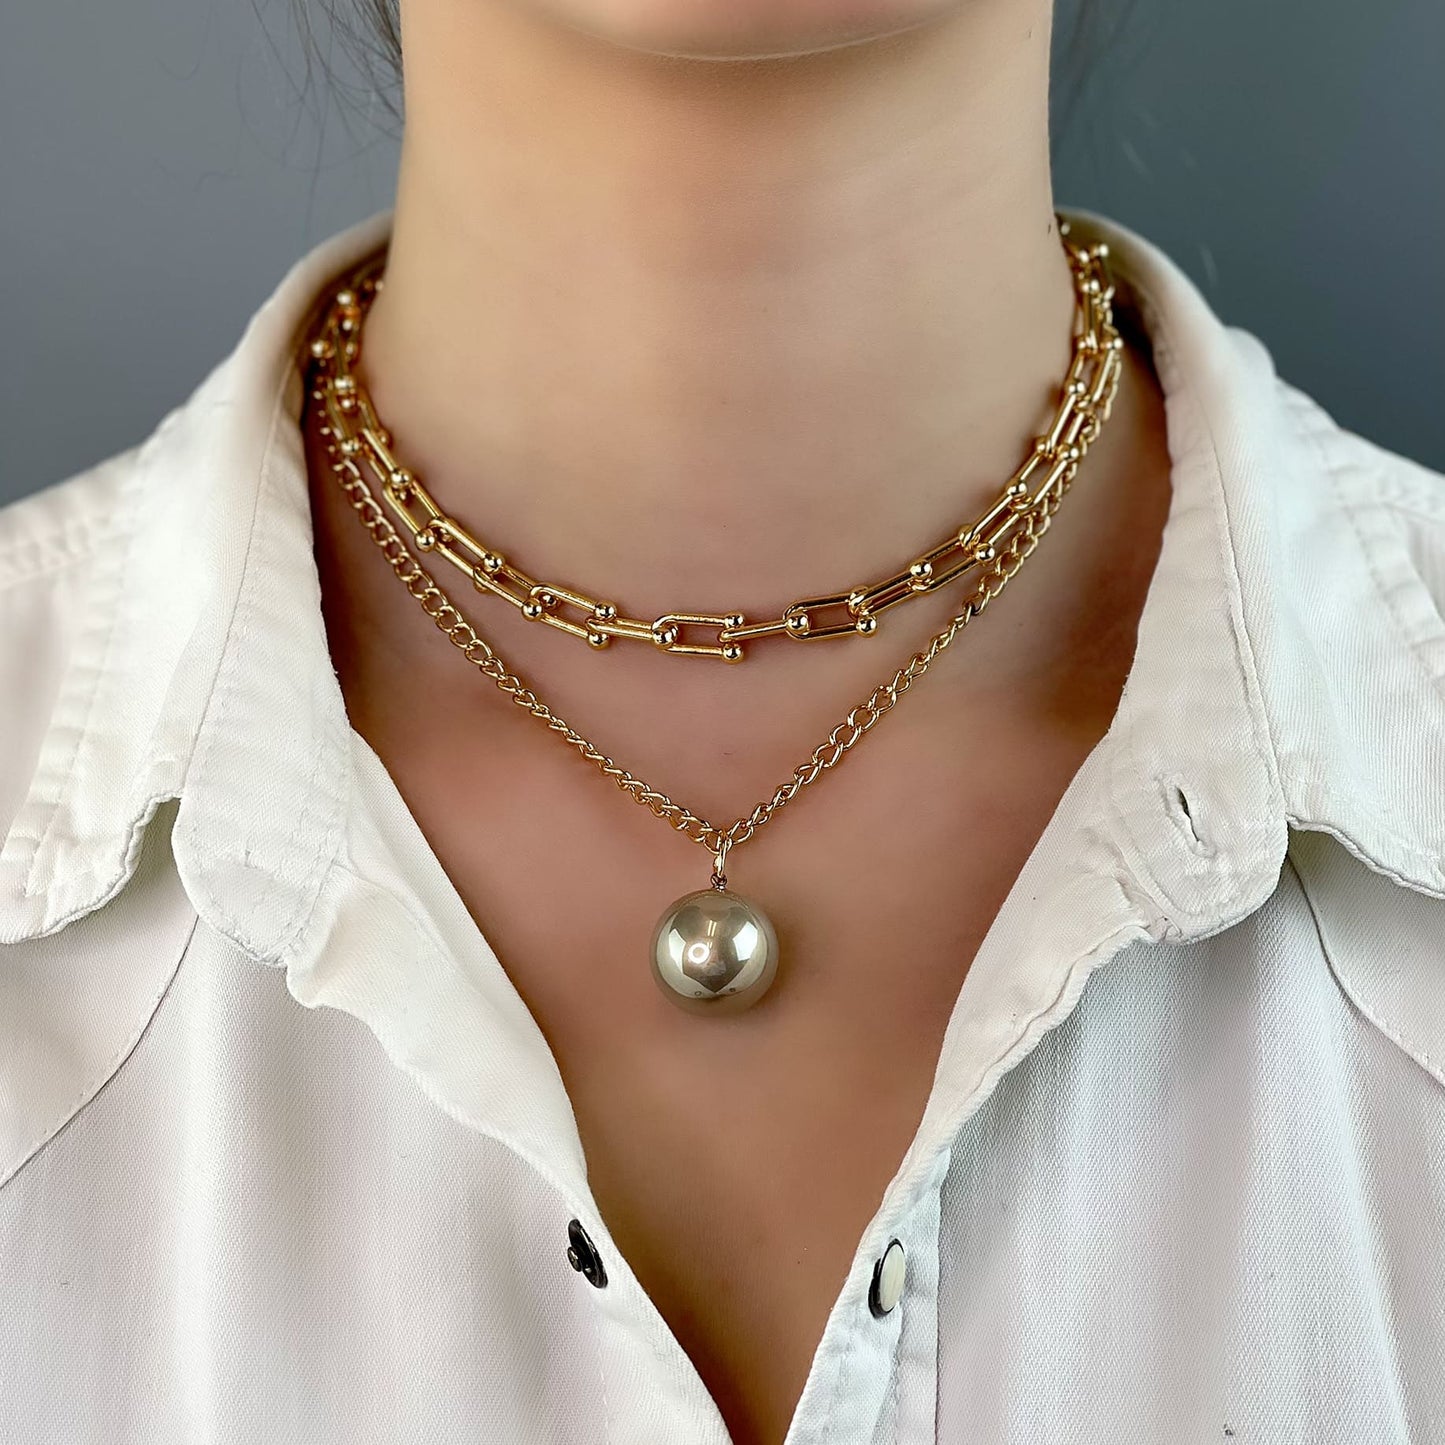 Hellen.V - Gold Necklaces with Ball Pendant